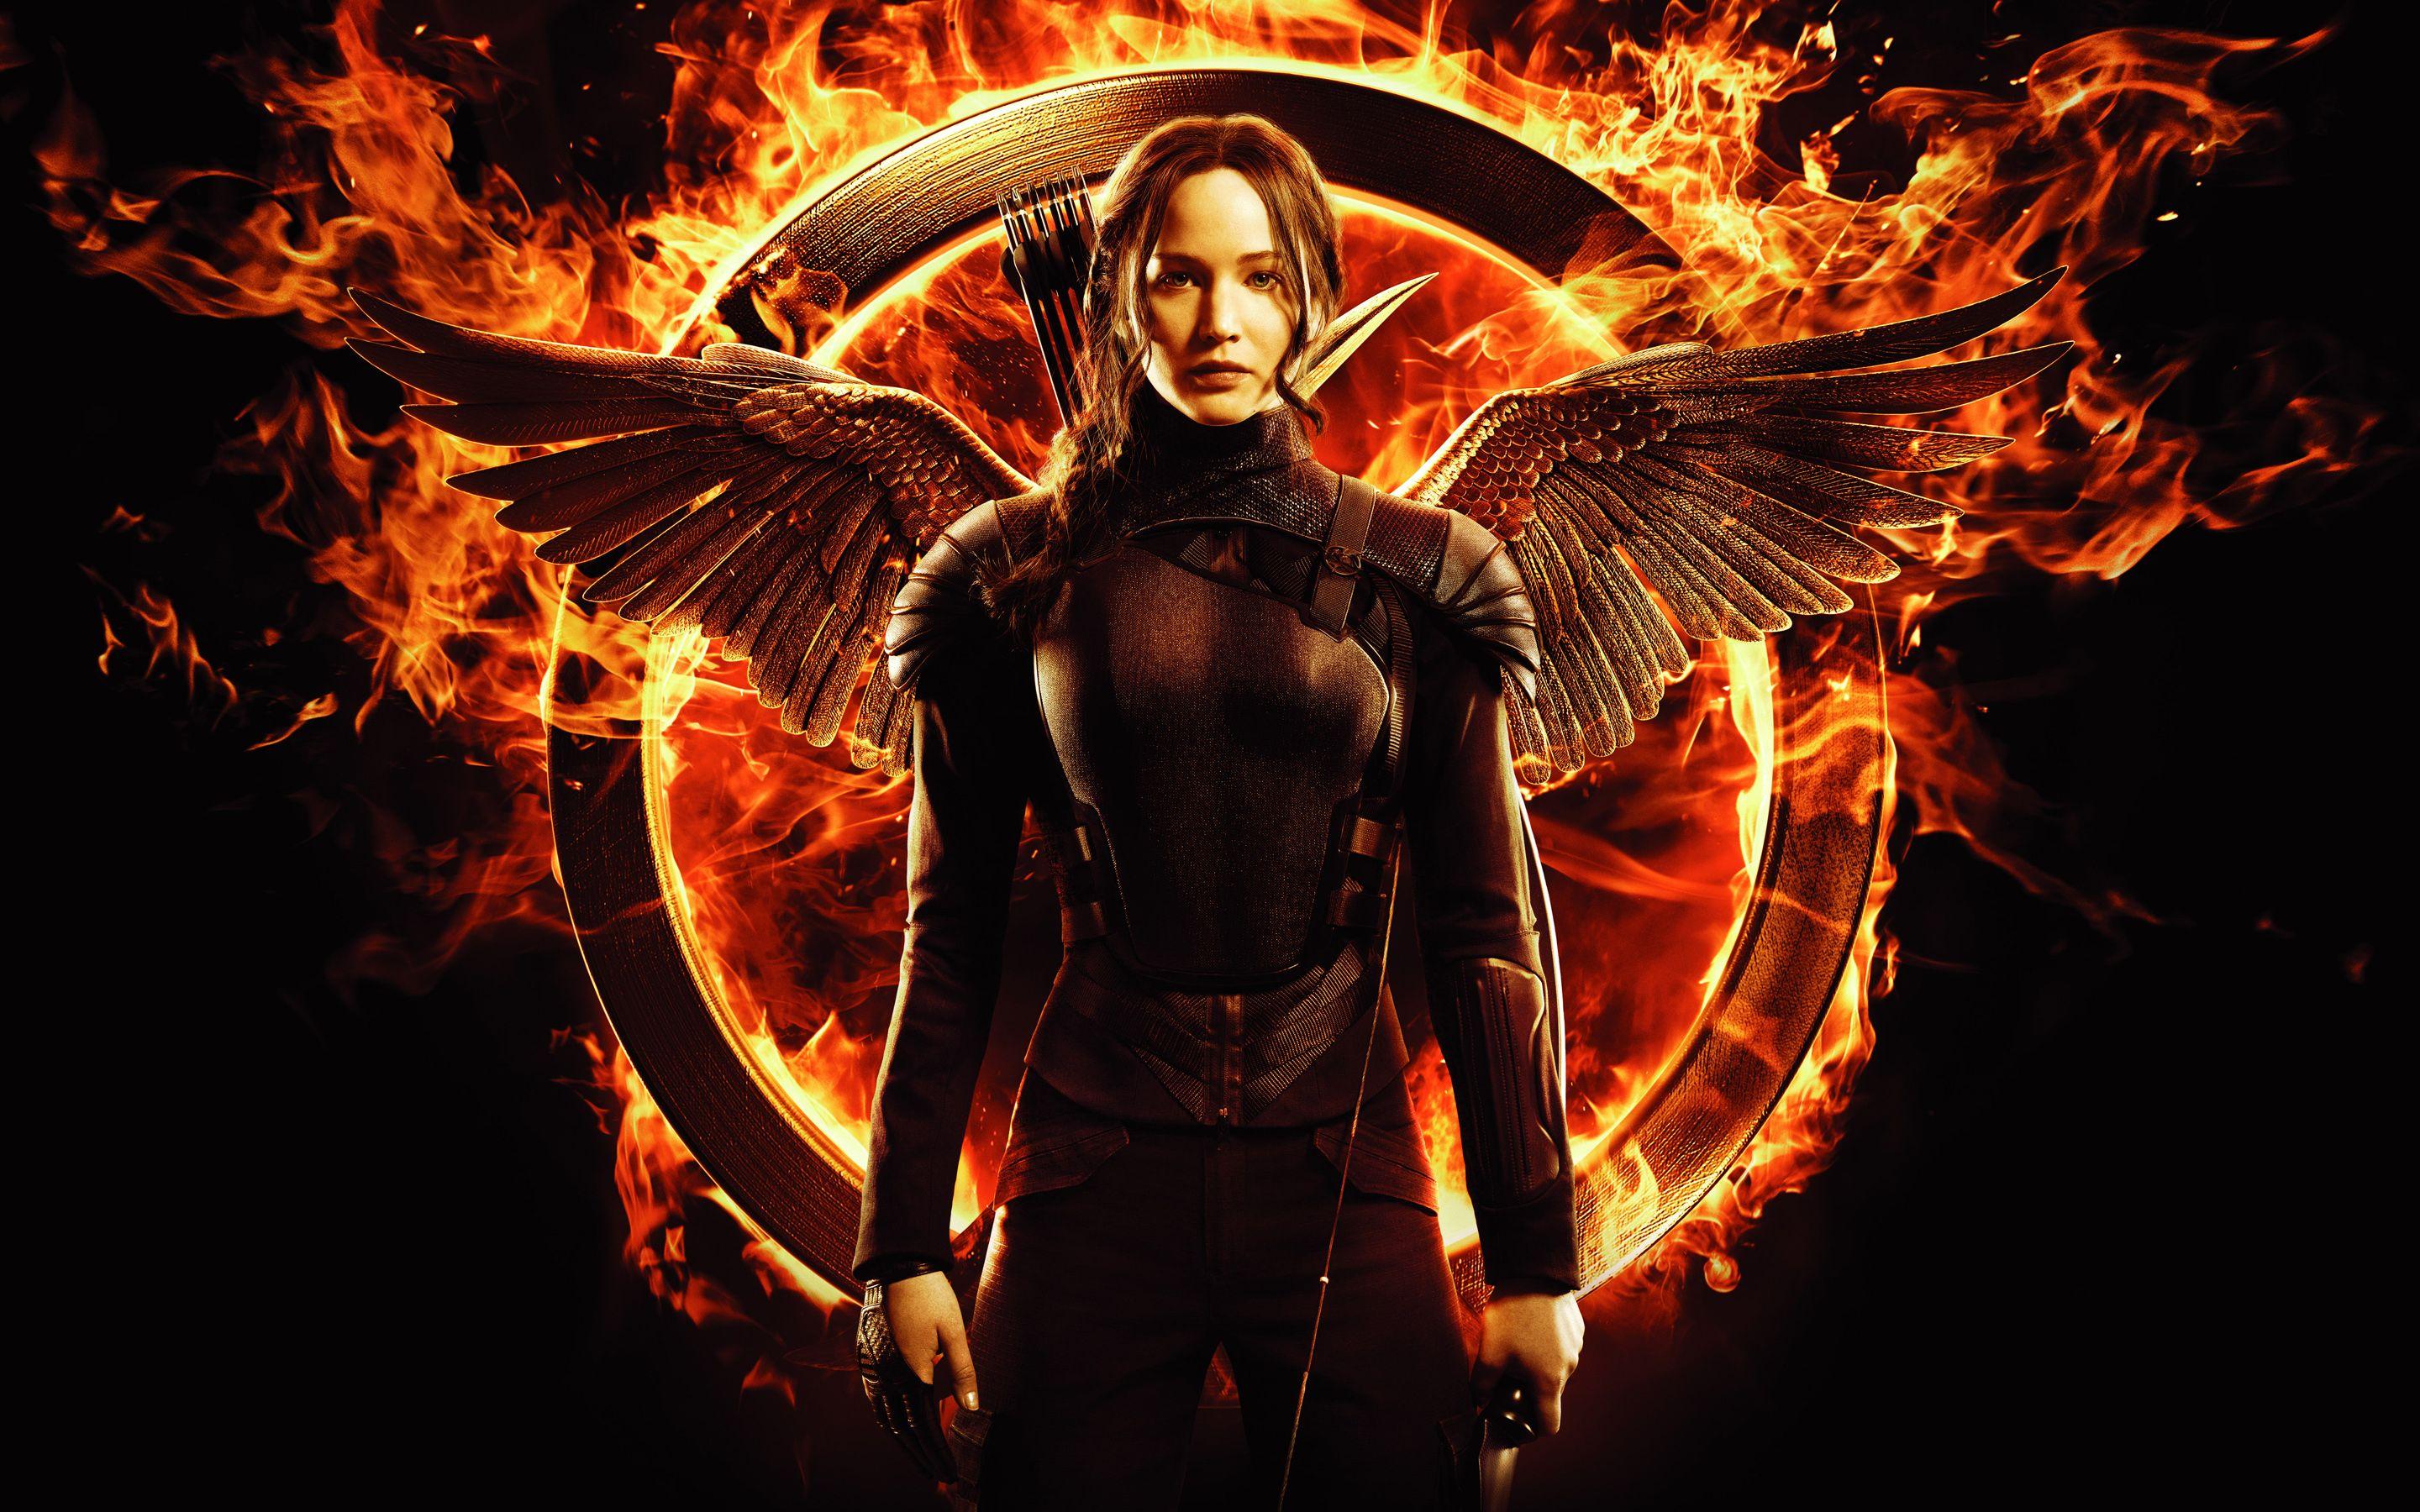 The Hunger Games Mockingjay Wallpapers - Wallpaper Cave.